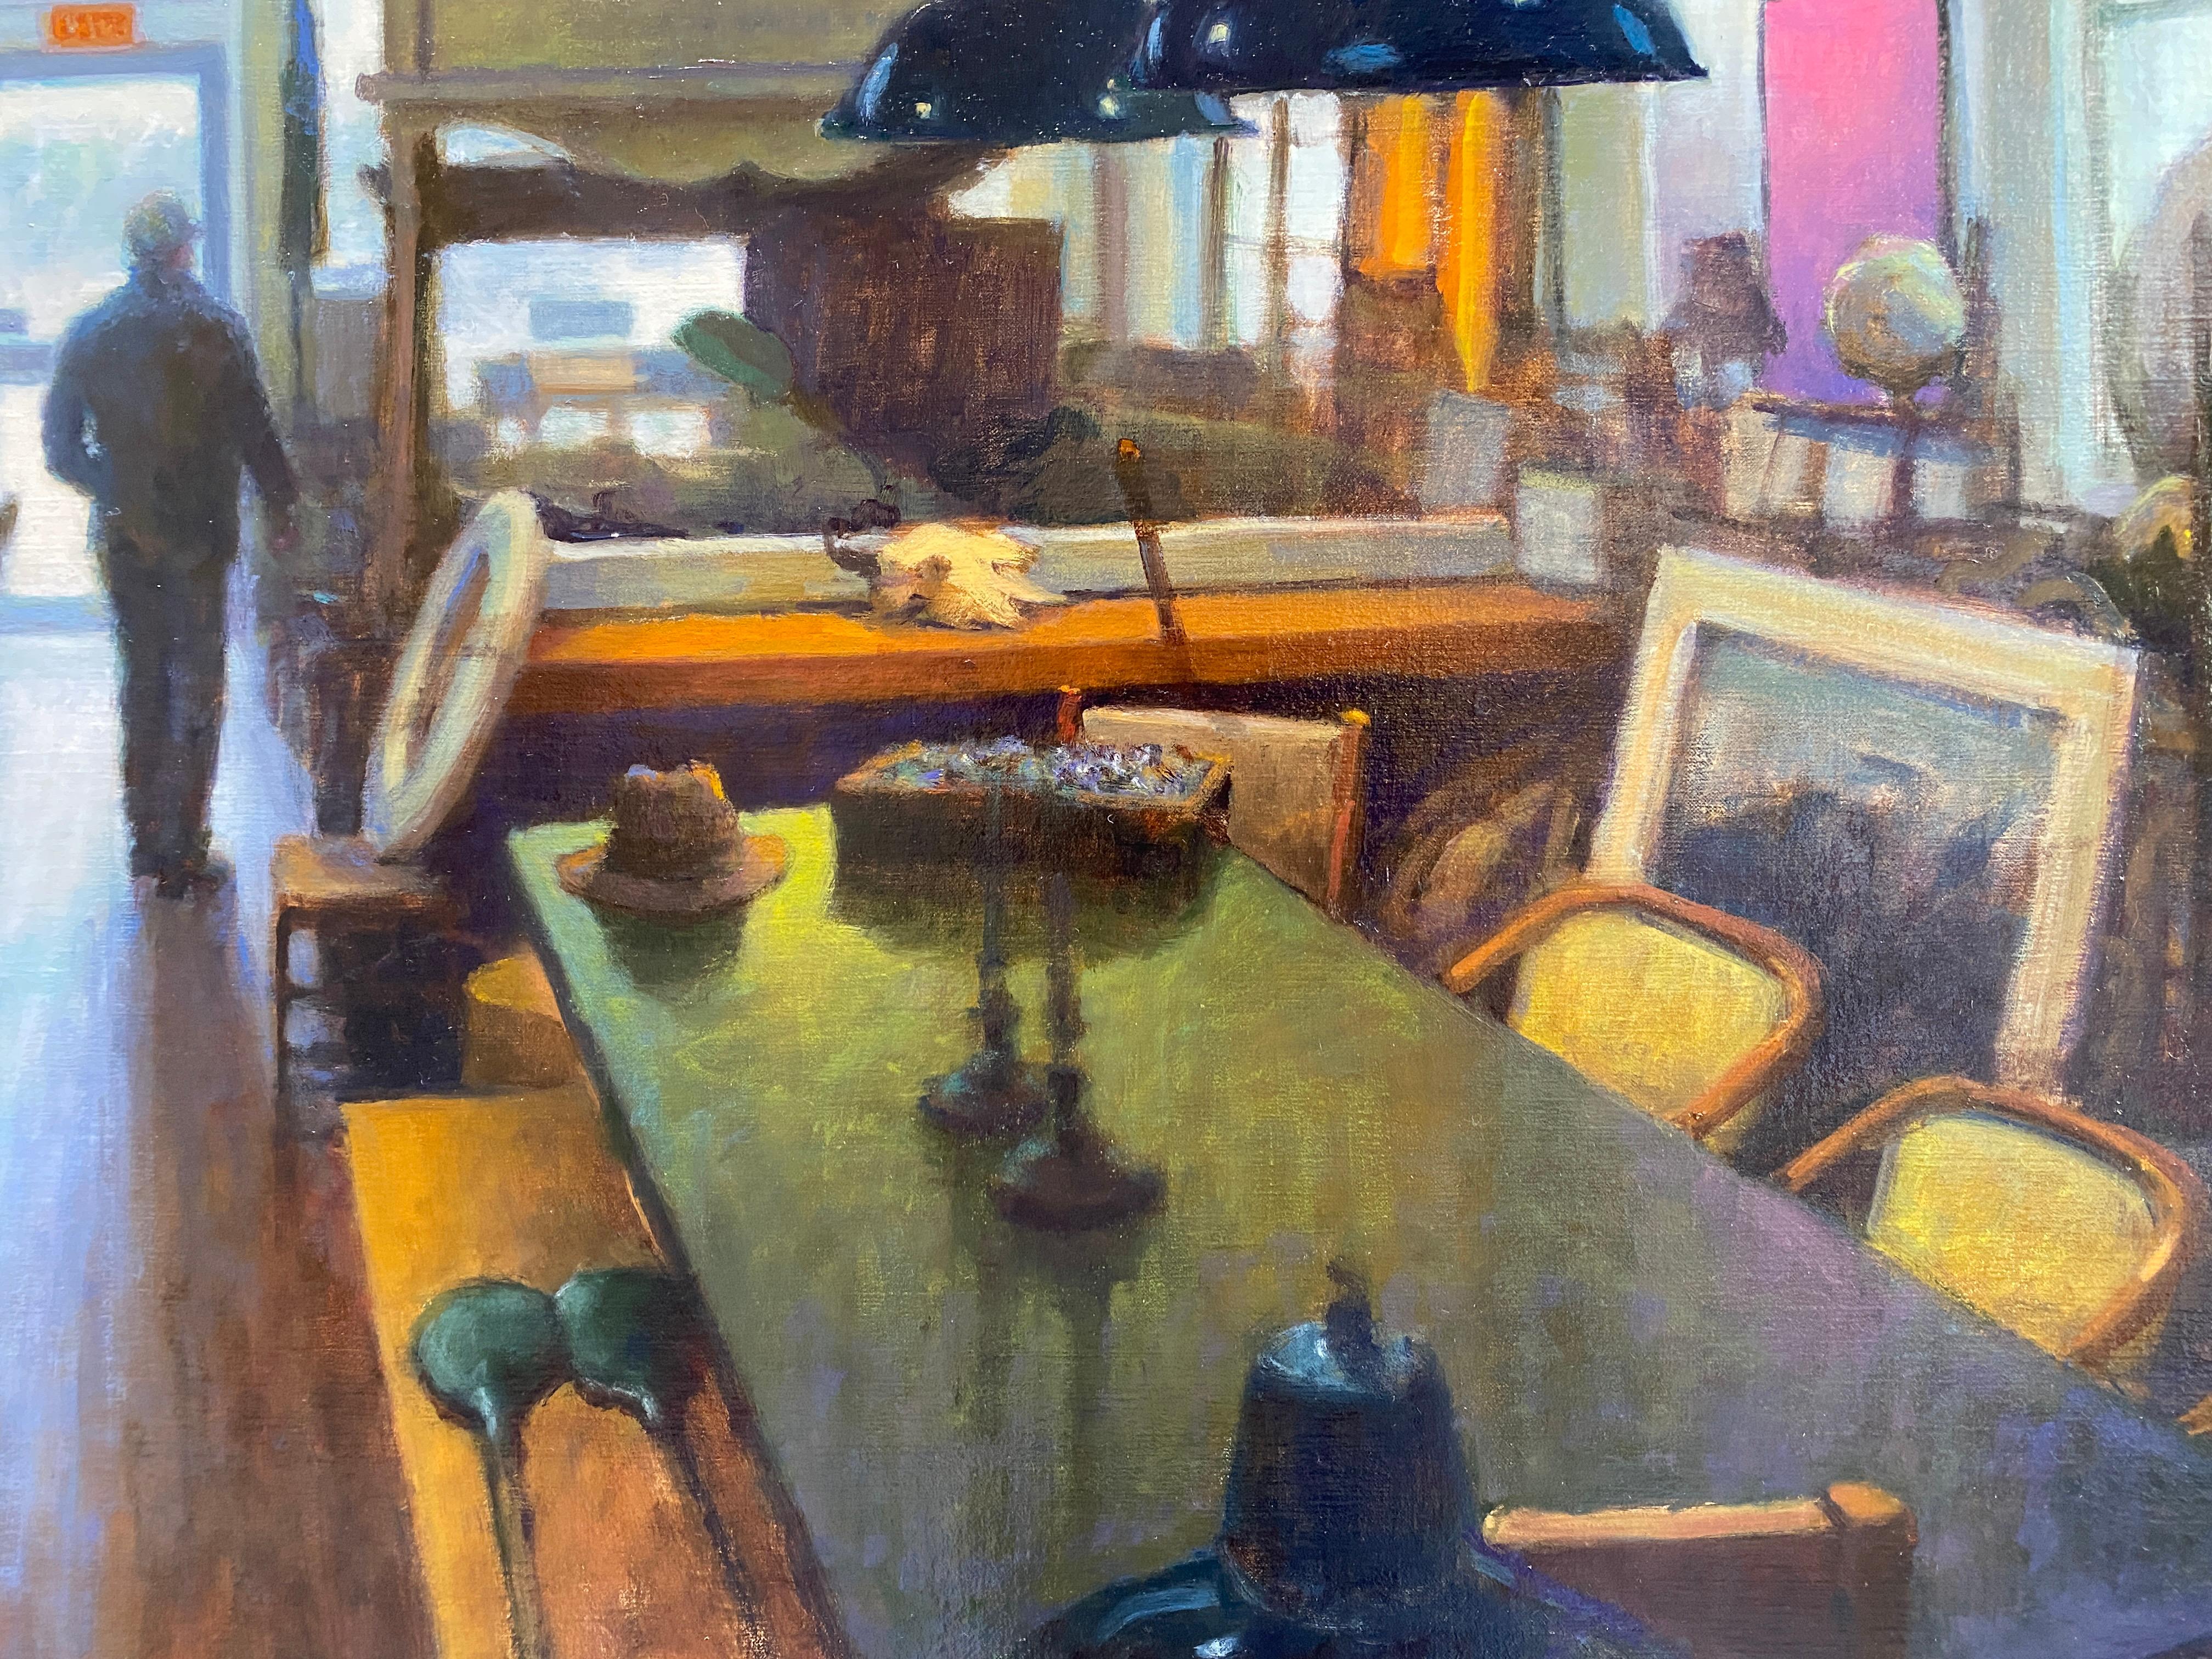 An oil painting, set inside the popular Sag Harbor Antique Shop, Black Swan Antiques. A figure stands against the natural light from the doorway, amidst the various objects for sale. An old ship hangs from the ceiling, along with industrial light